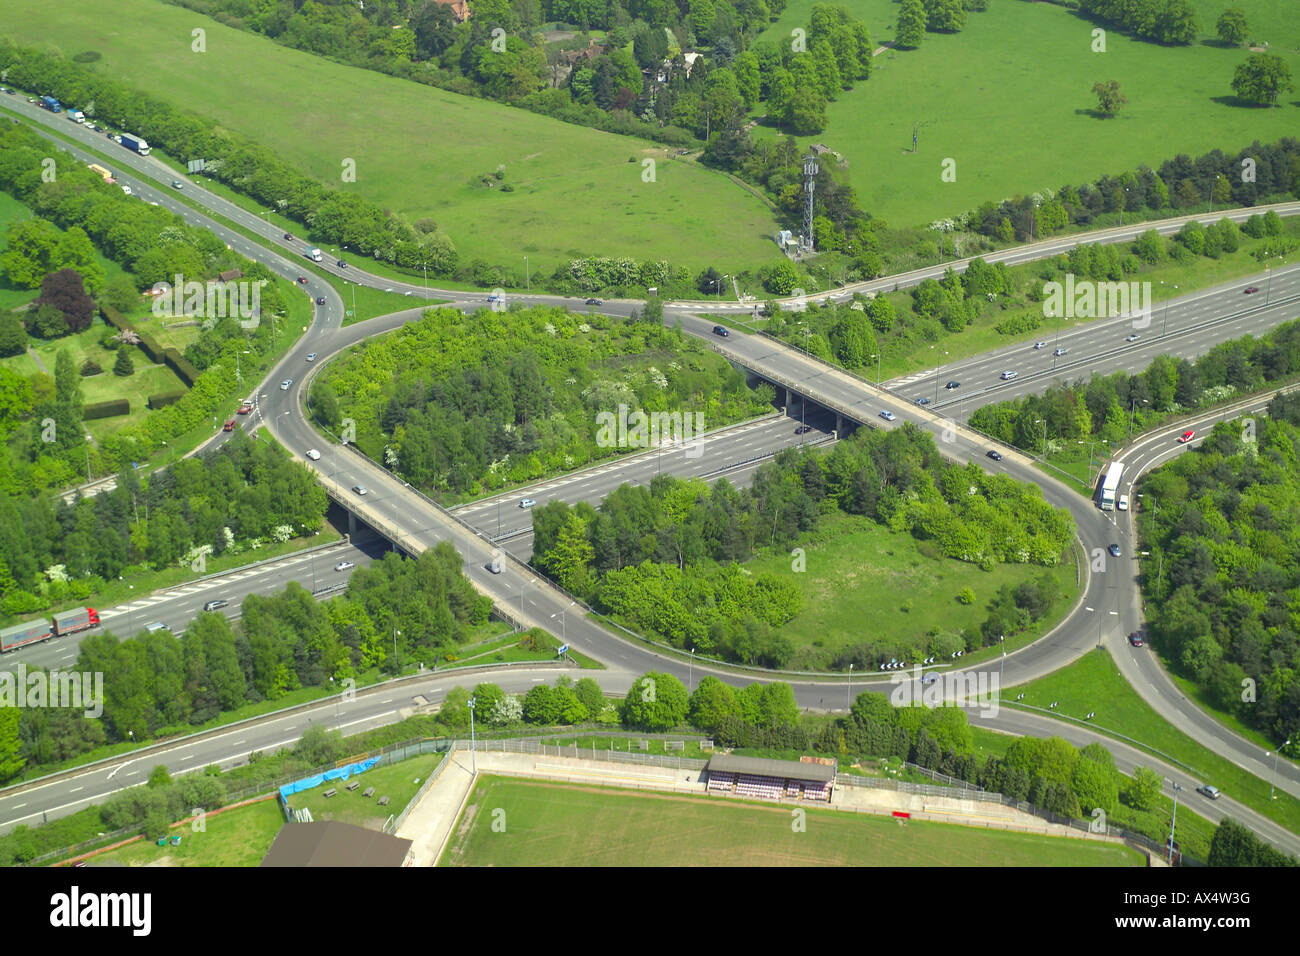 Aerial view of a motorway junction where the M40 junction meets the A355 near Beaconsfield Stock Photo